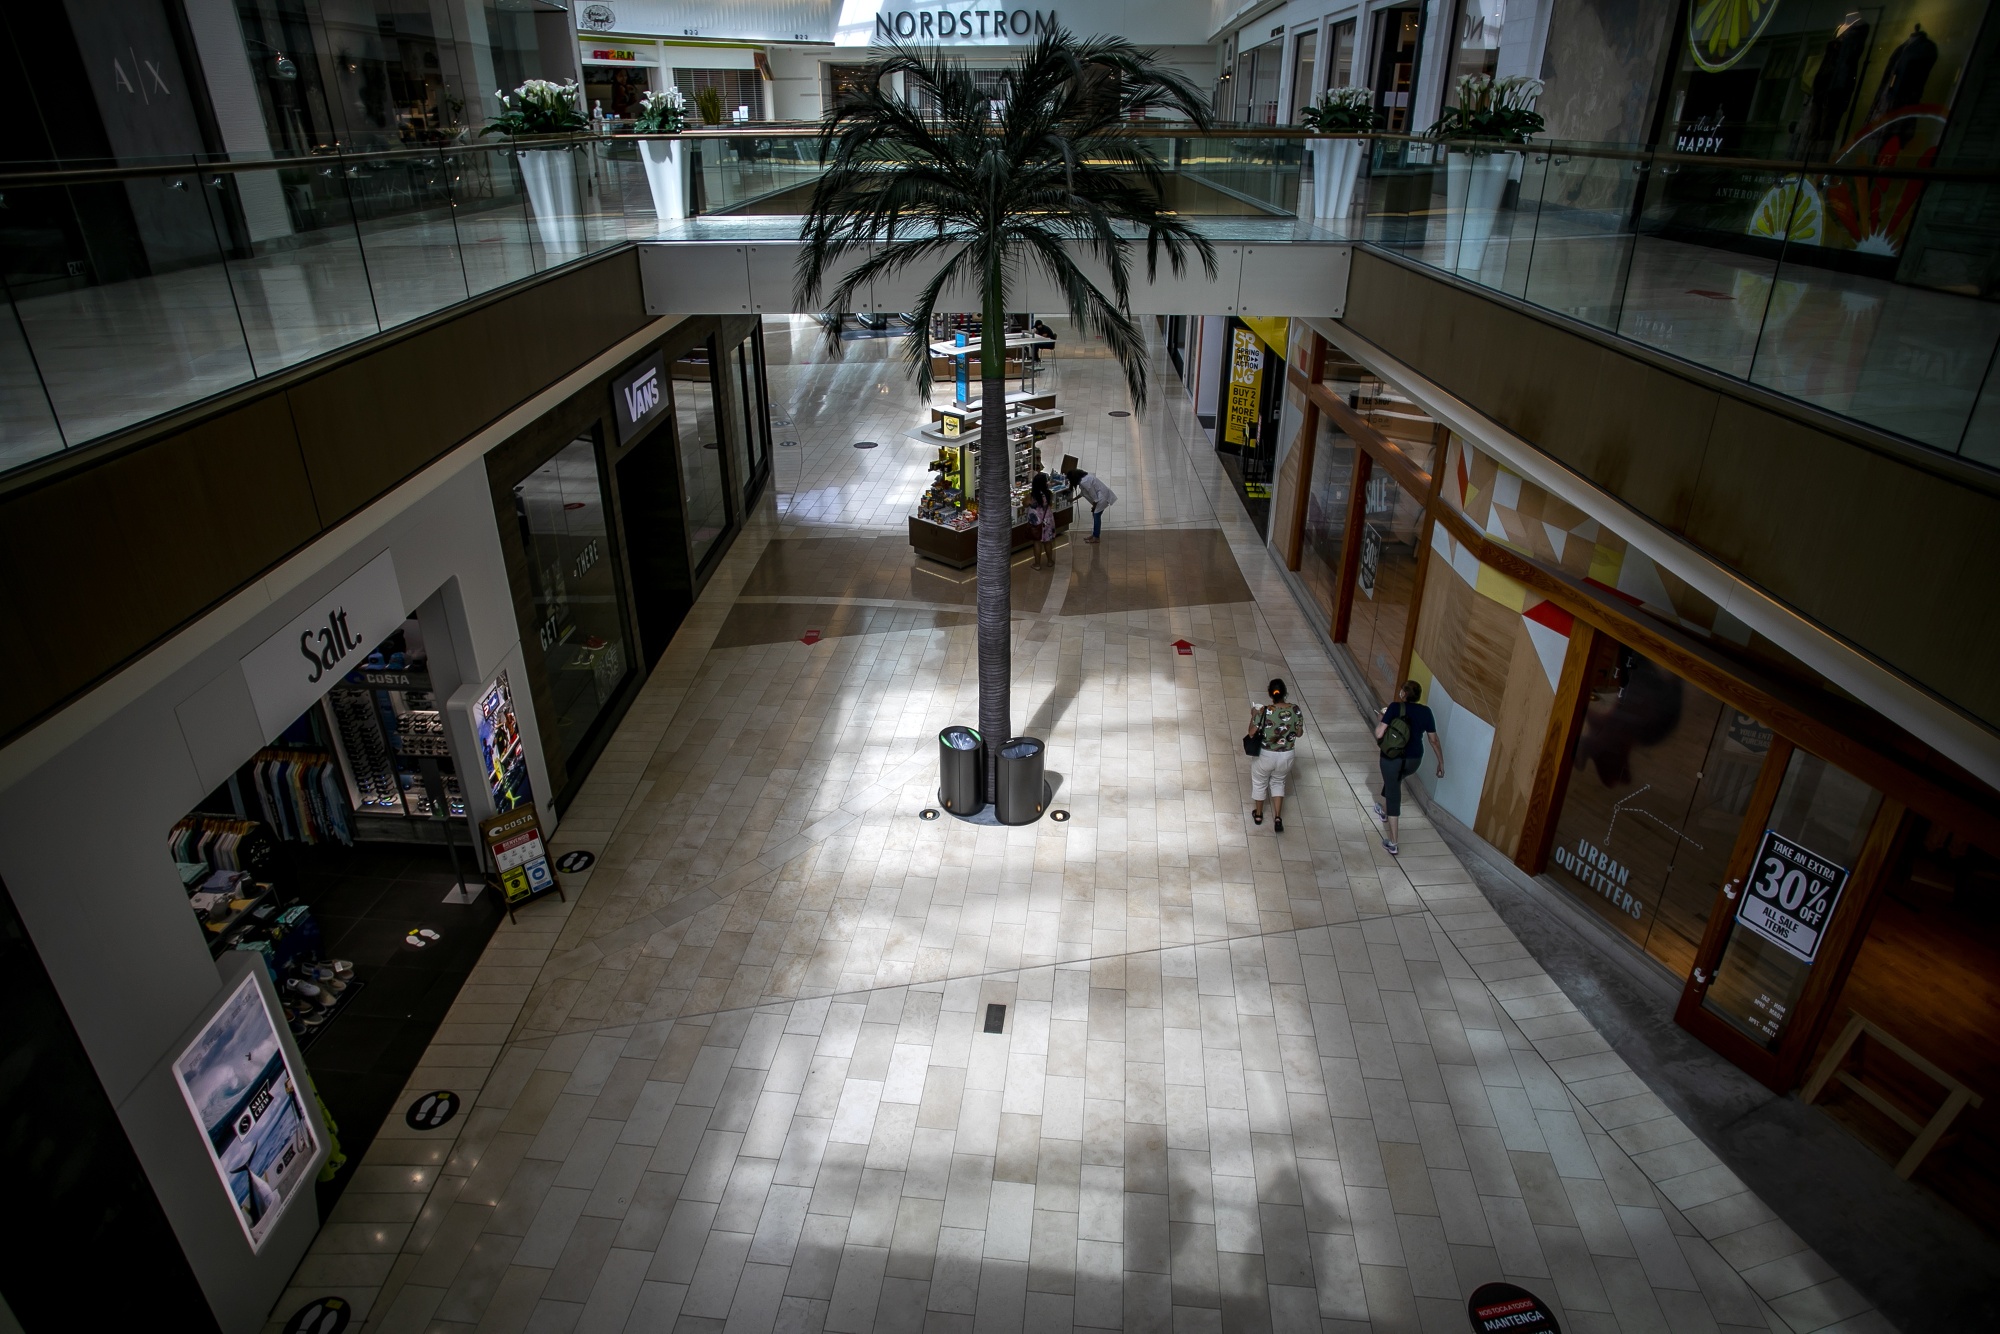 Puerto Rico Mall of San Juan Lost Saks, Nordstrom. Can It Survive